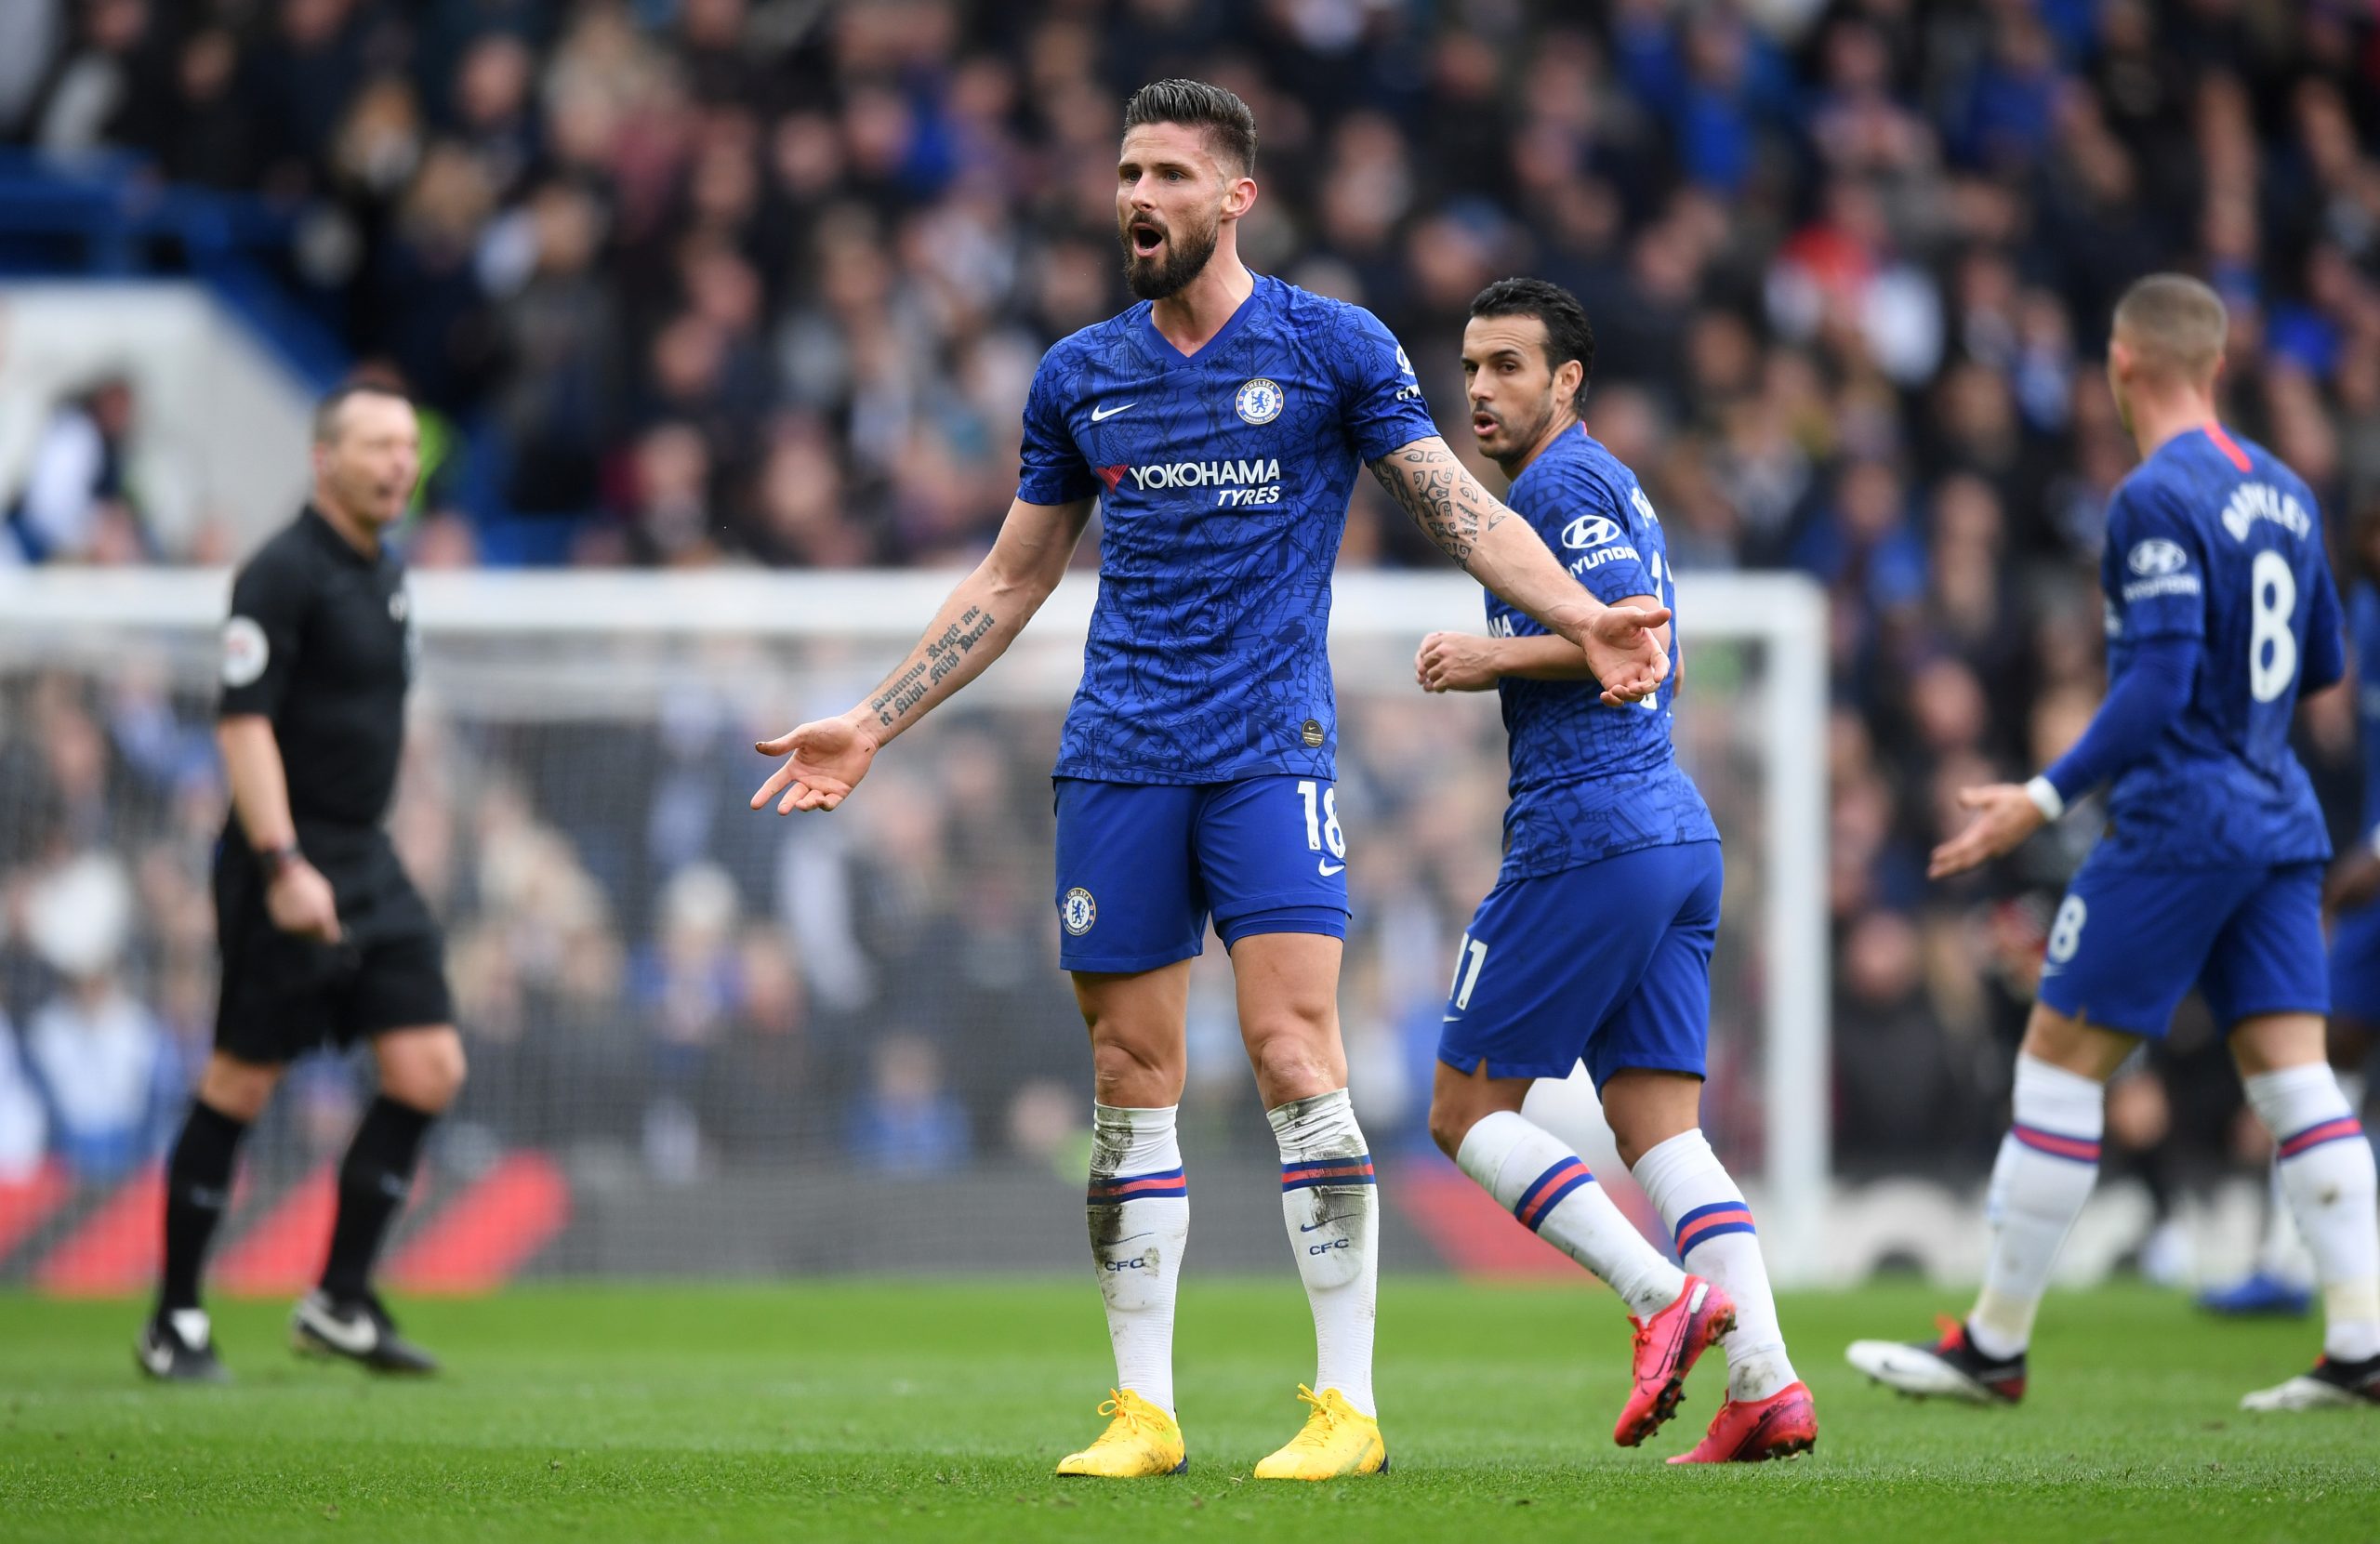 Olivier Giroud of Chelsea reacts during the Premier League match between Chelsea FC and Everton FC at Stamford Bridge on March 08, 2020 in London, United Kingdom. (Photo by Shaun Botterill/Getty Images)